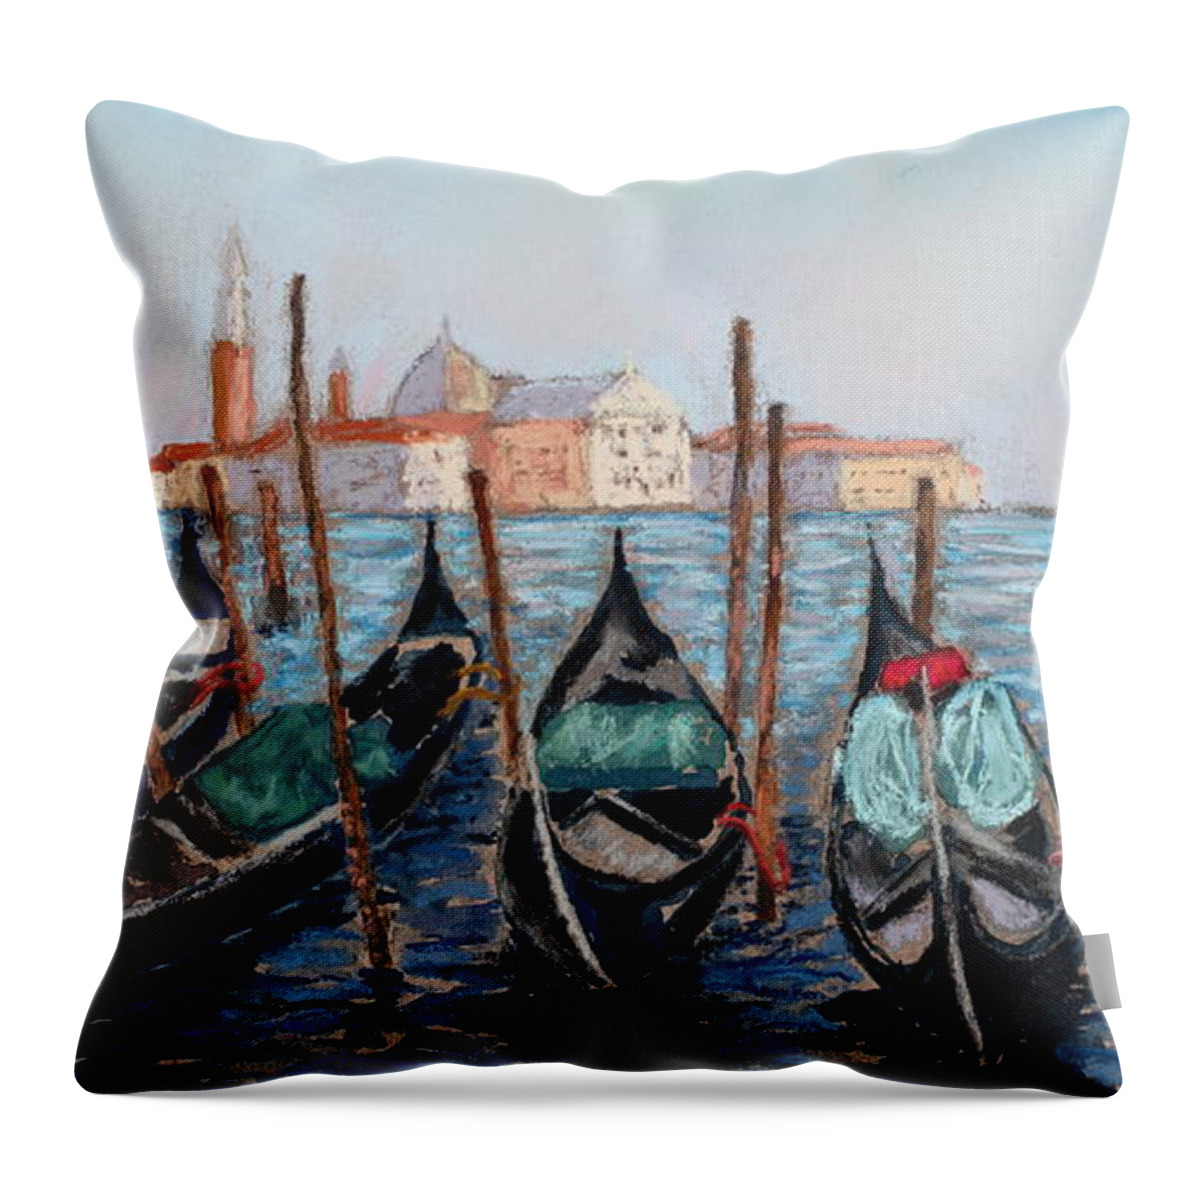 Venice Throw Pillow featuring the painting Tied Up in Venice by Mary Benke